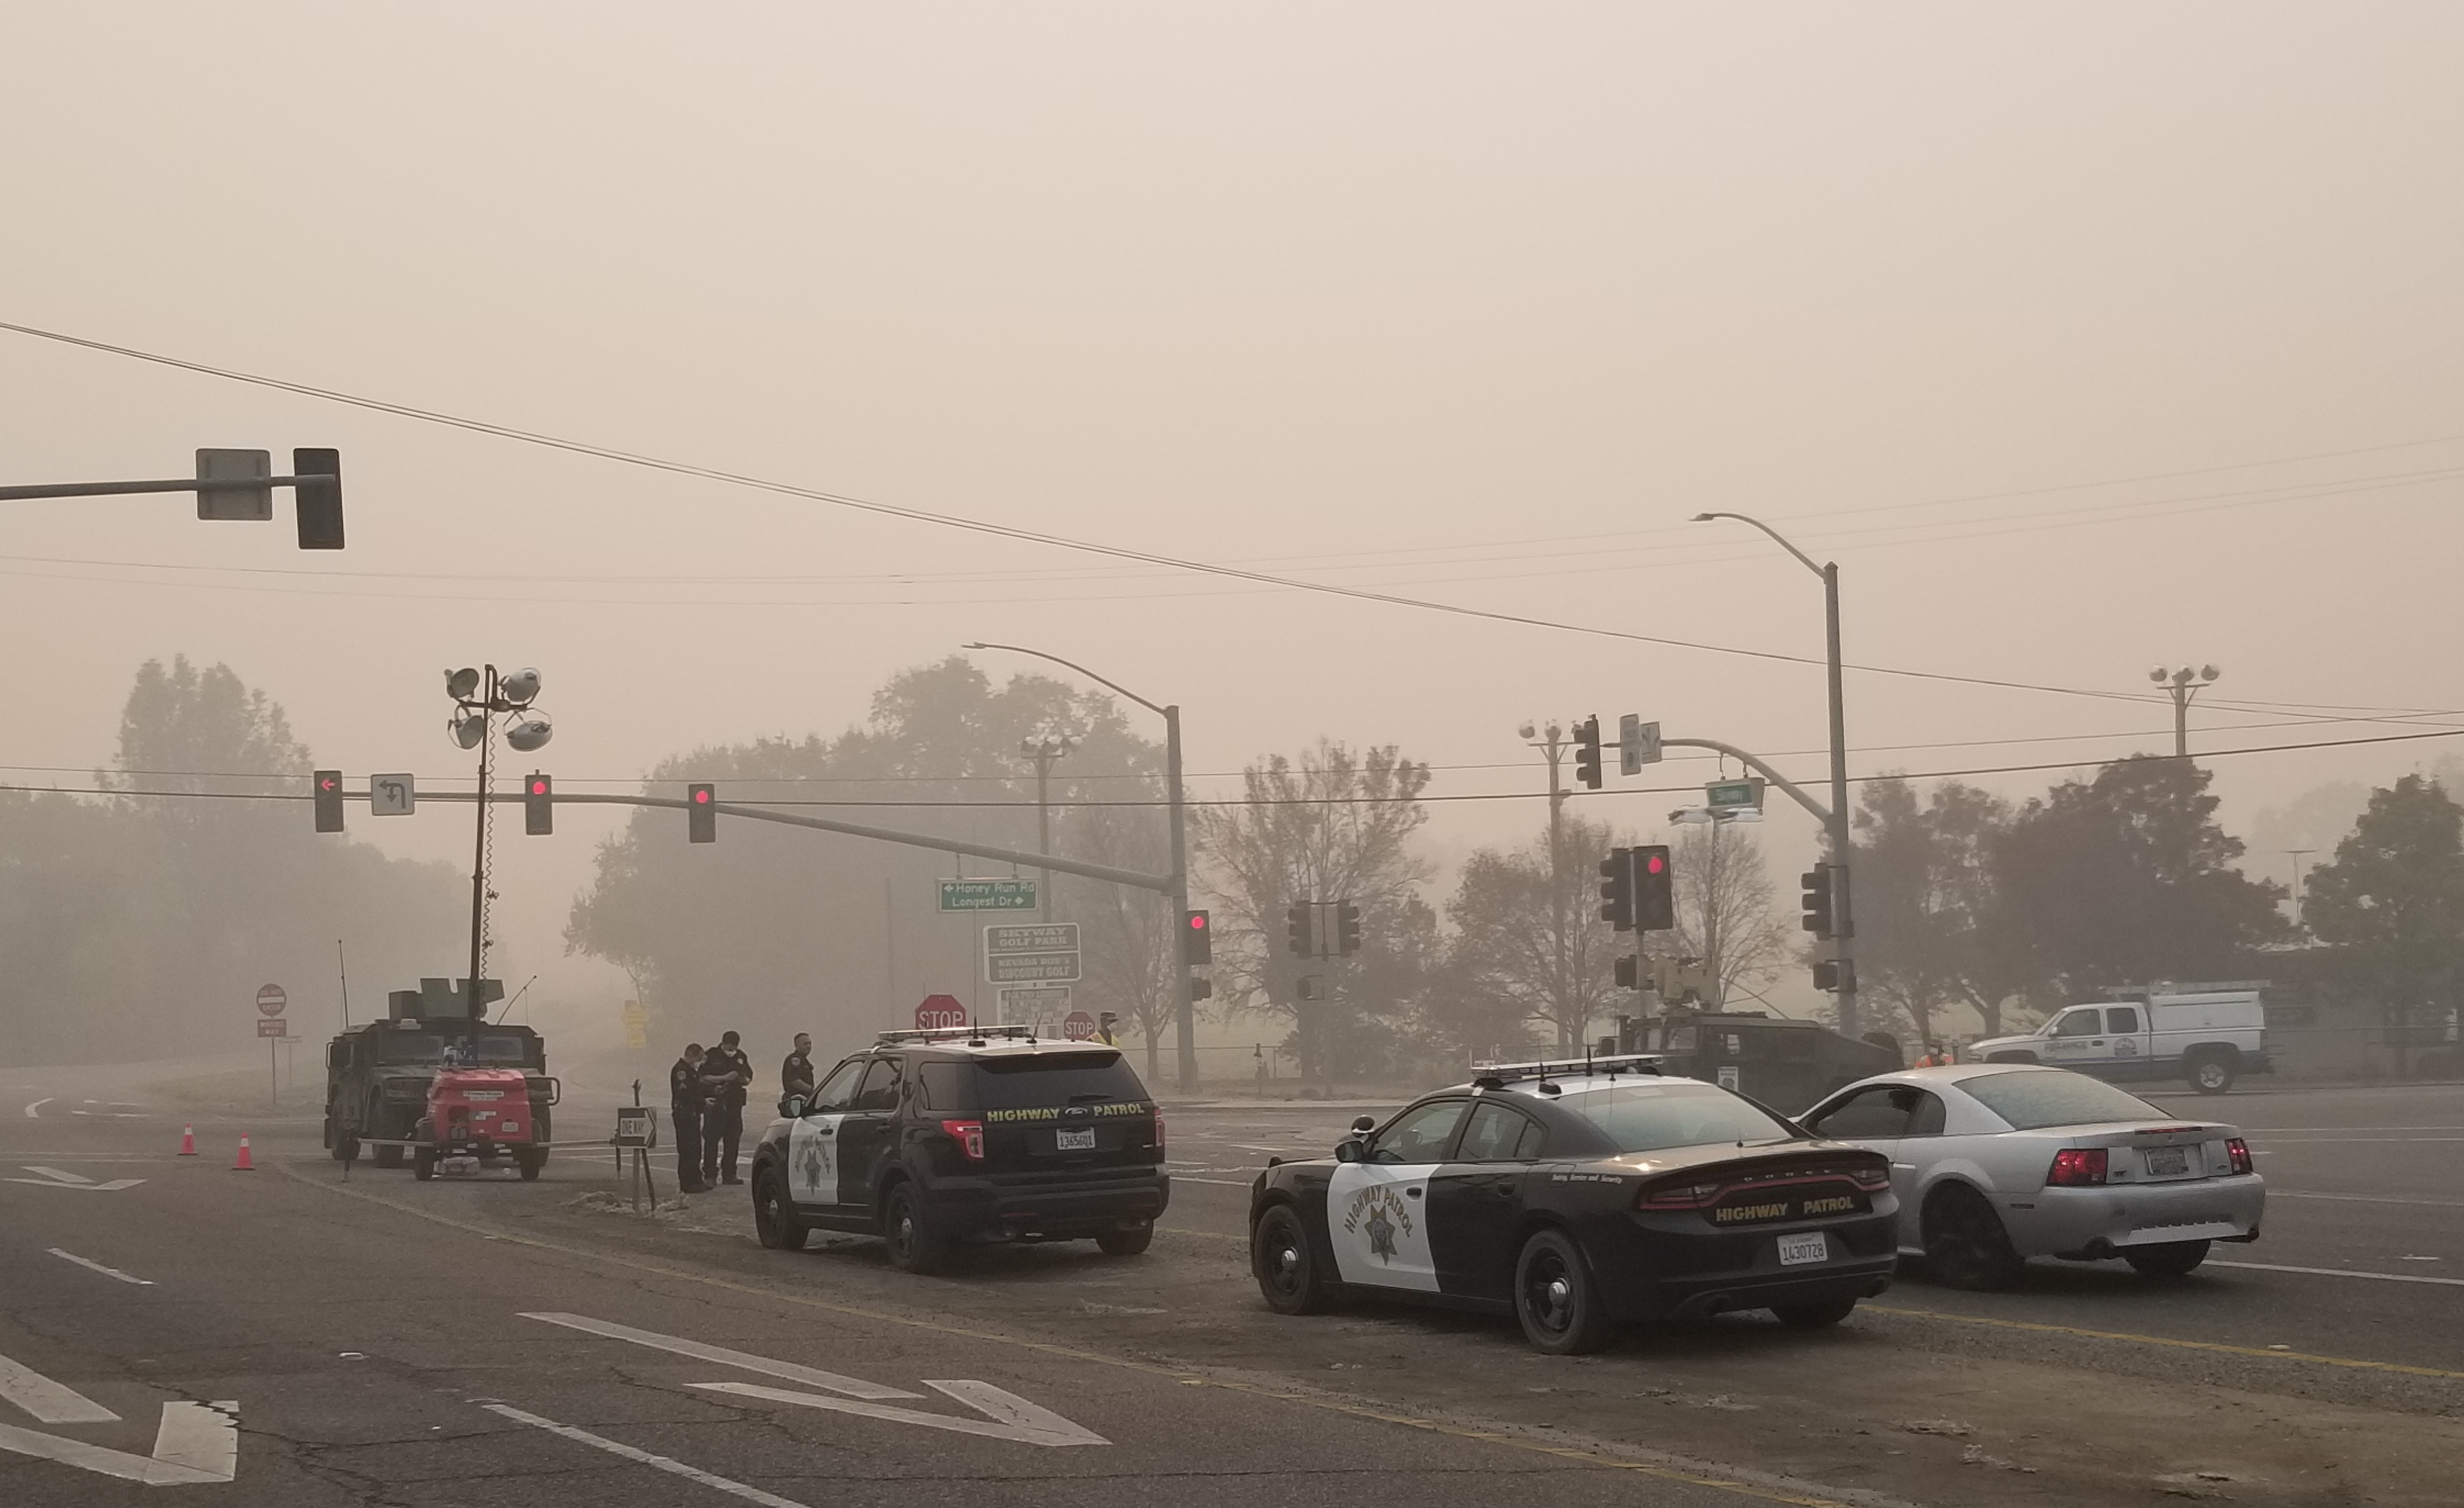 California Highway Patrol closed the intersection of Skyway and Honey Run Road in Chico. Only emergency responders and commercial vehicles can go further.